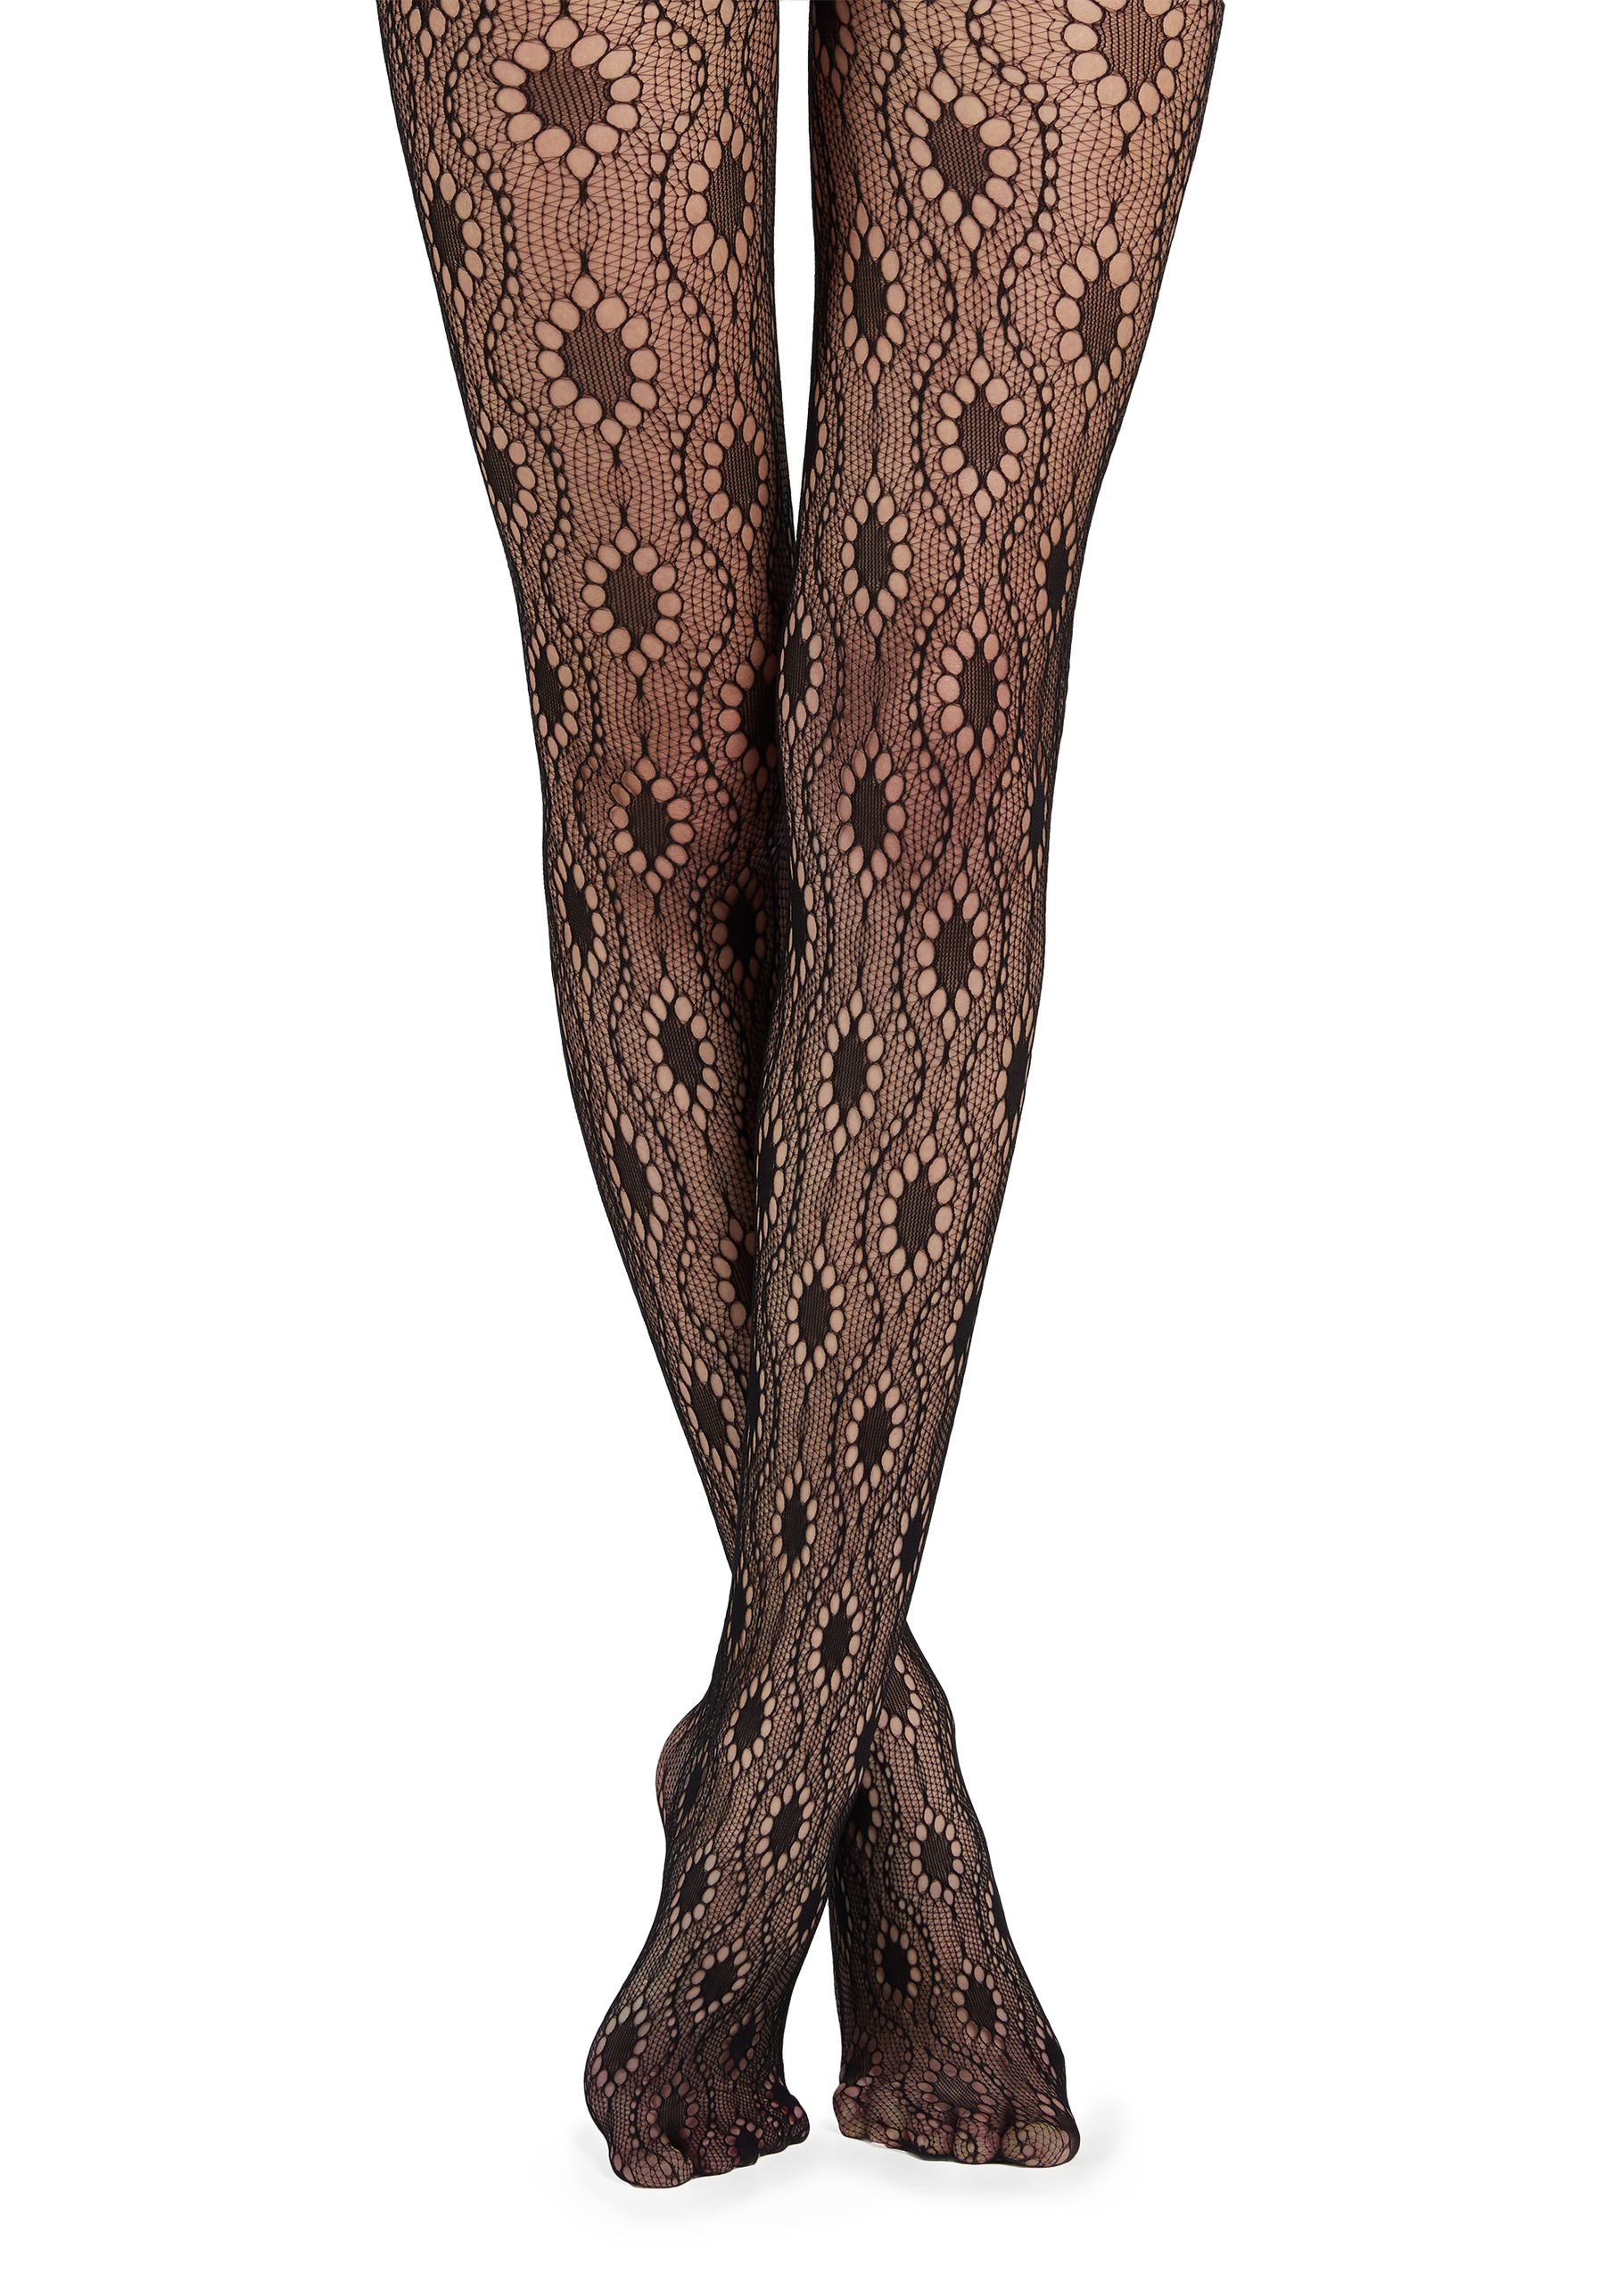 Télécharger photo fishnet tights png